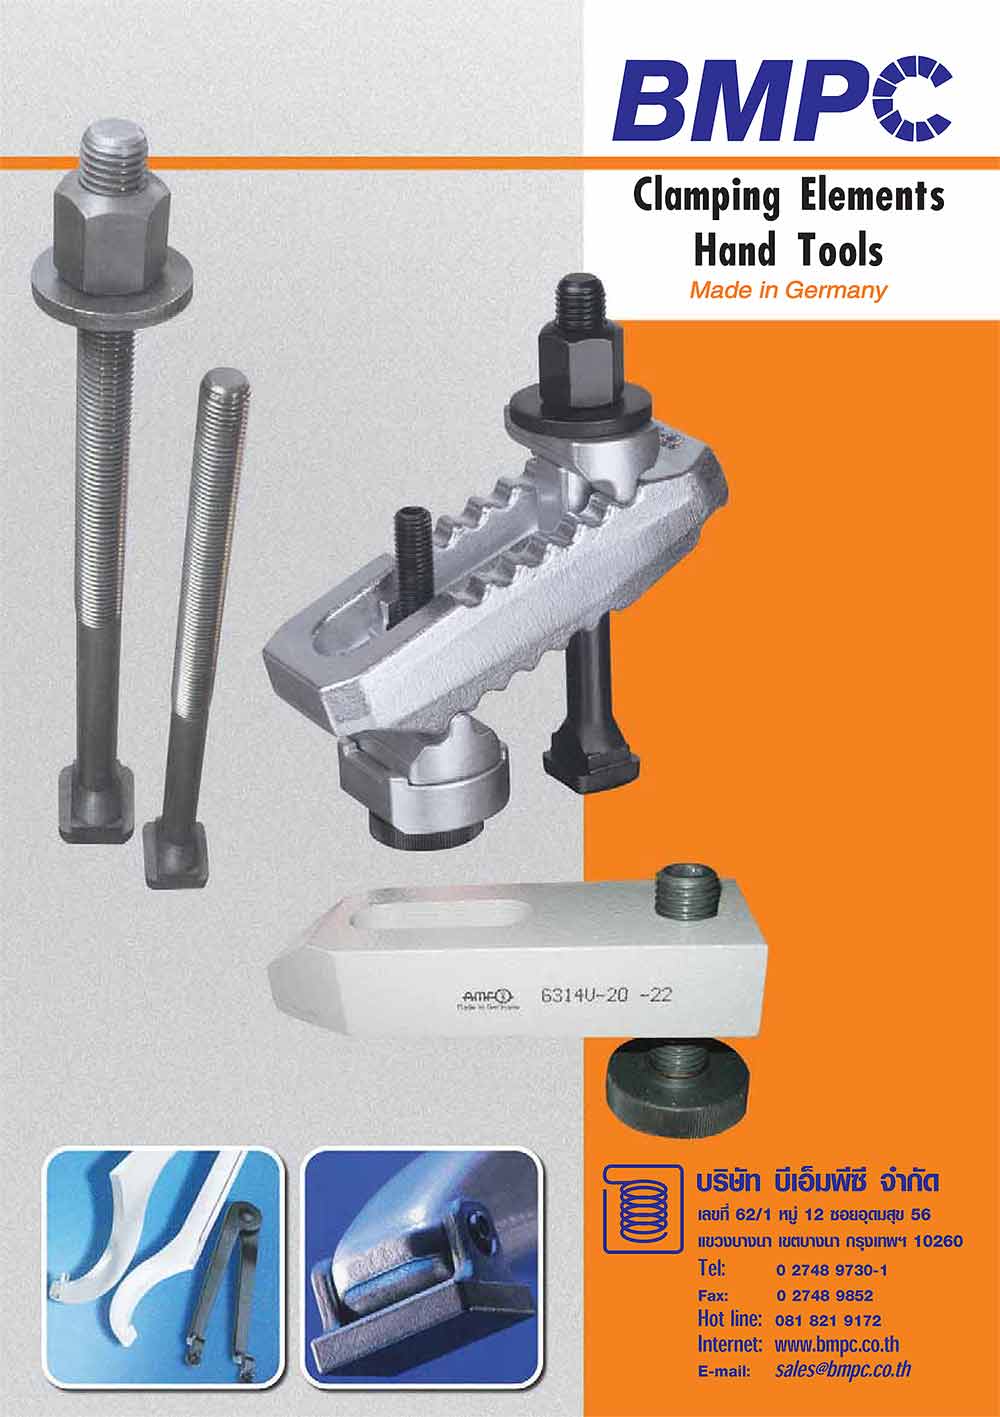 AMF, Clamp, T-slot bolt, T-nut, Hook wrench, Heavy washer, Dished washer, Extension nut, collar nut